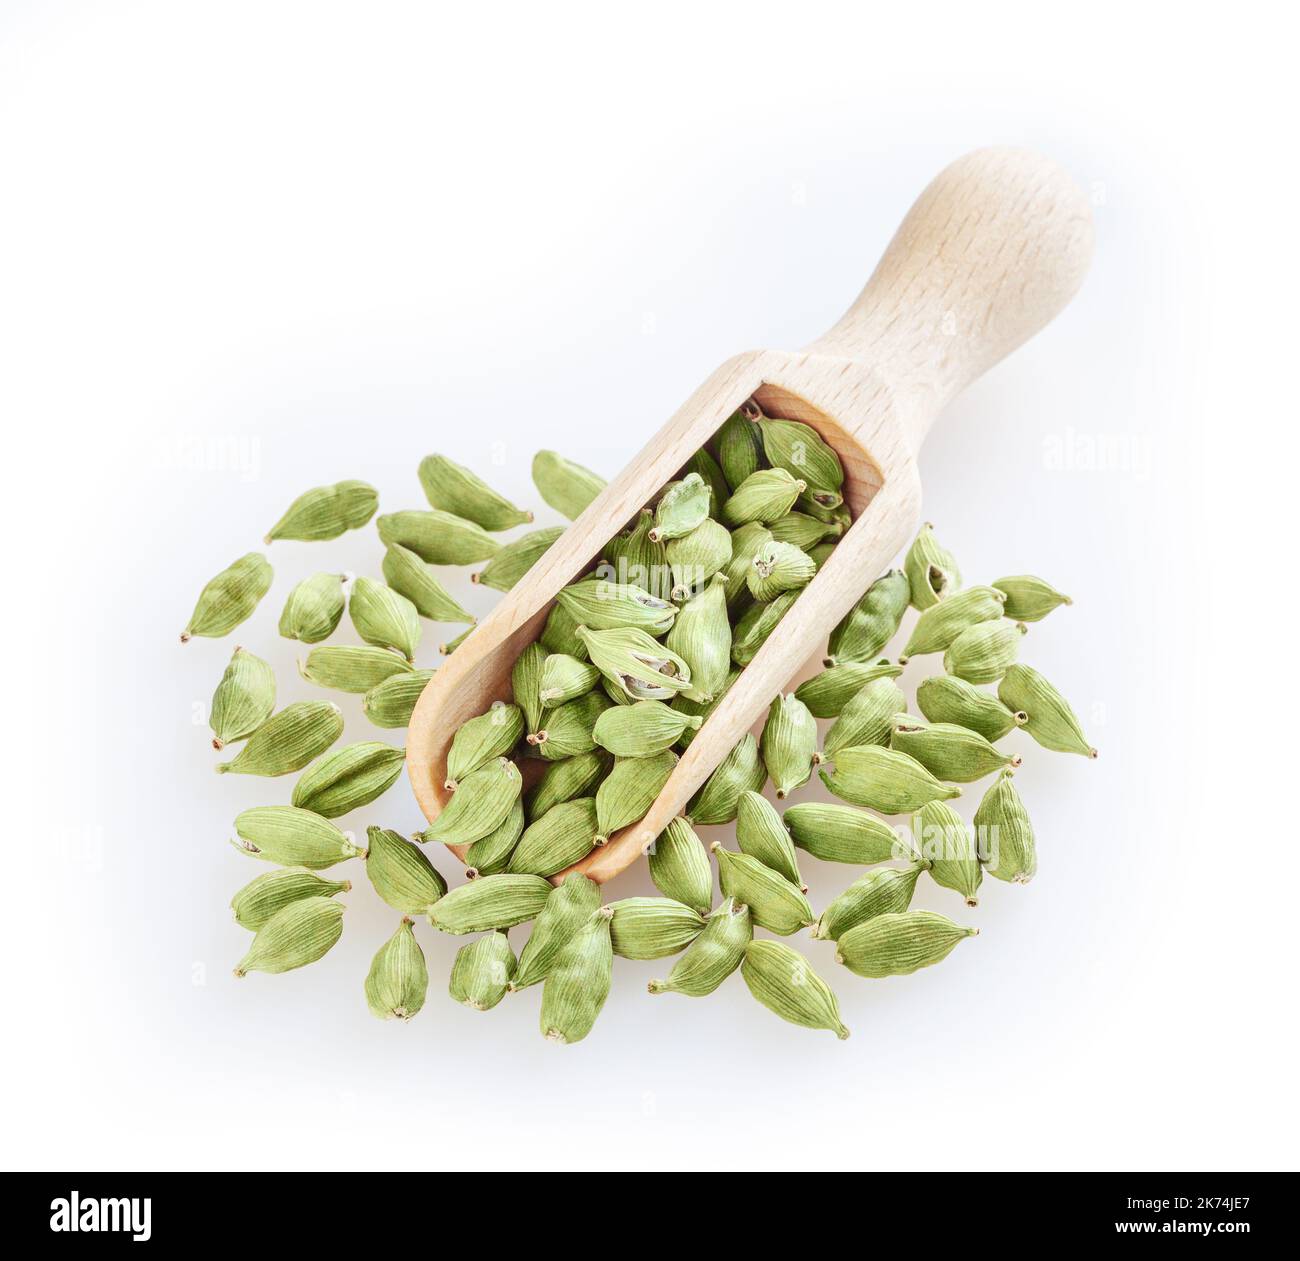 Green cardamom in wooden scoop isolated on white background Stock Photo